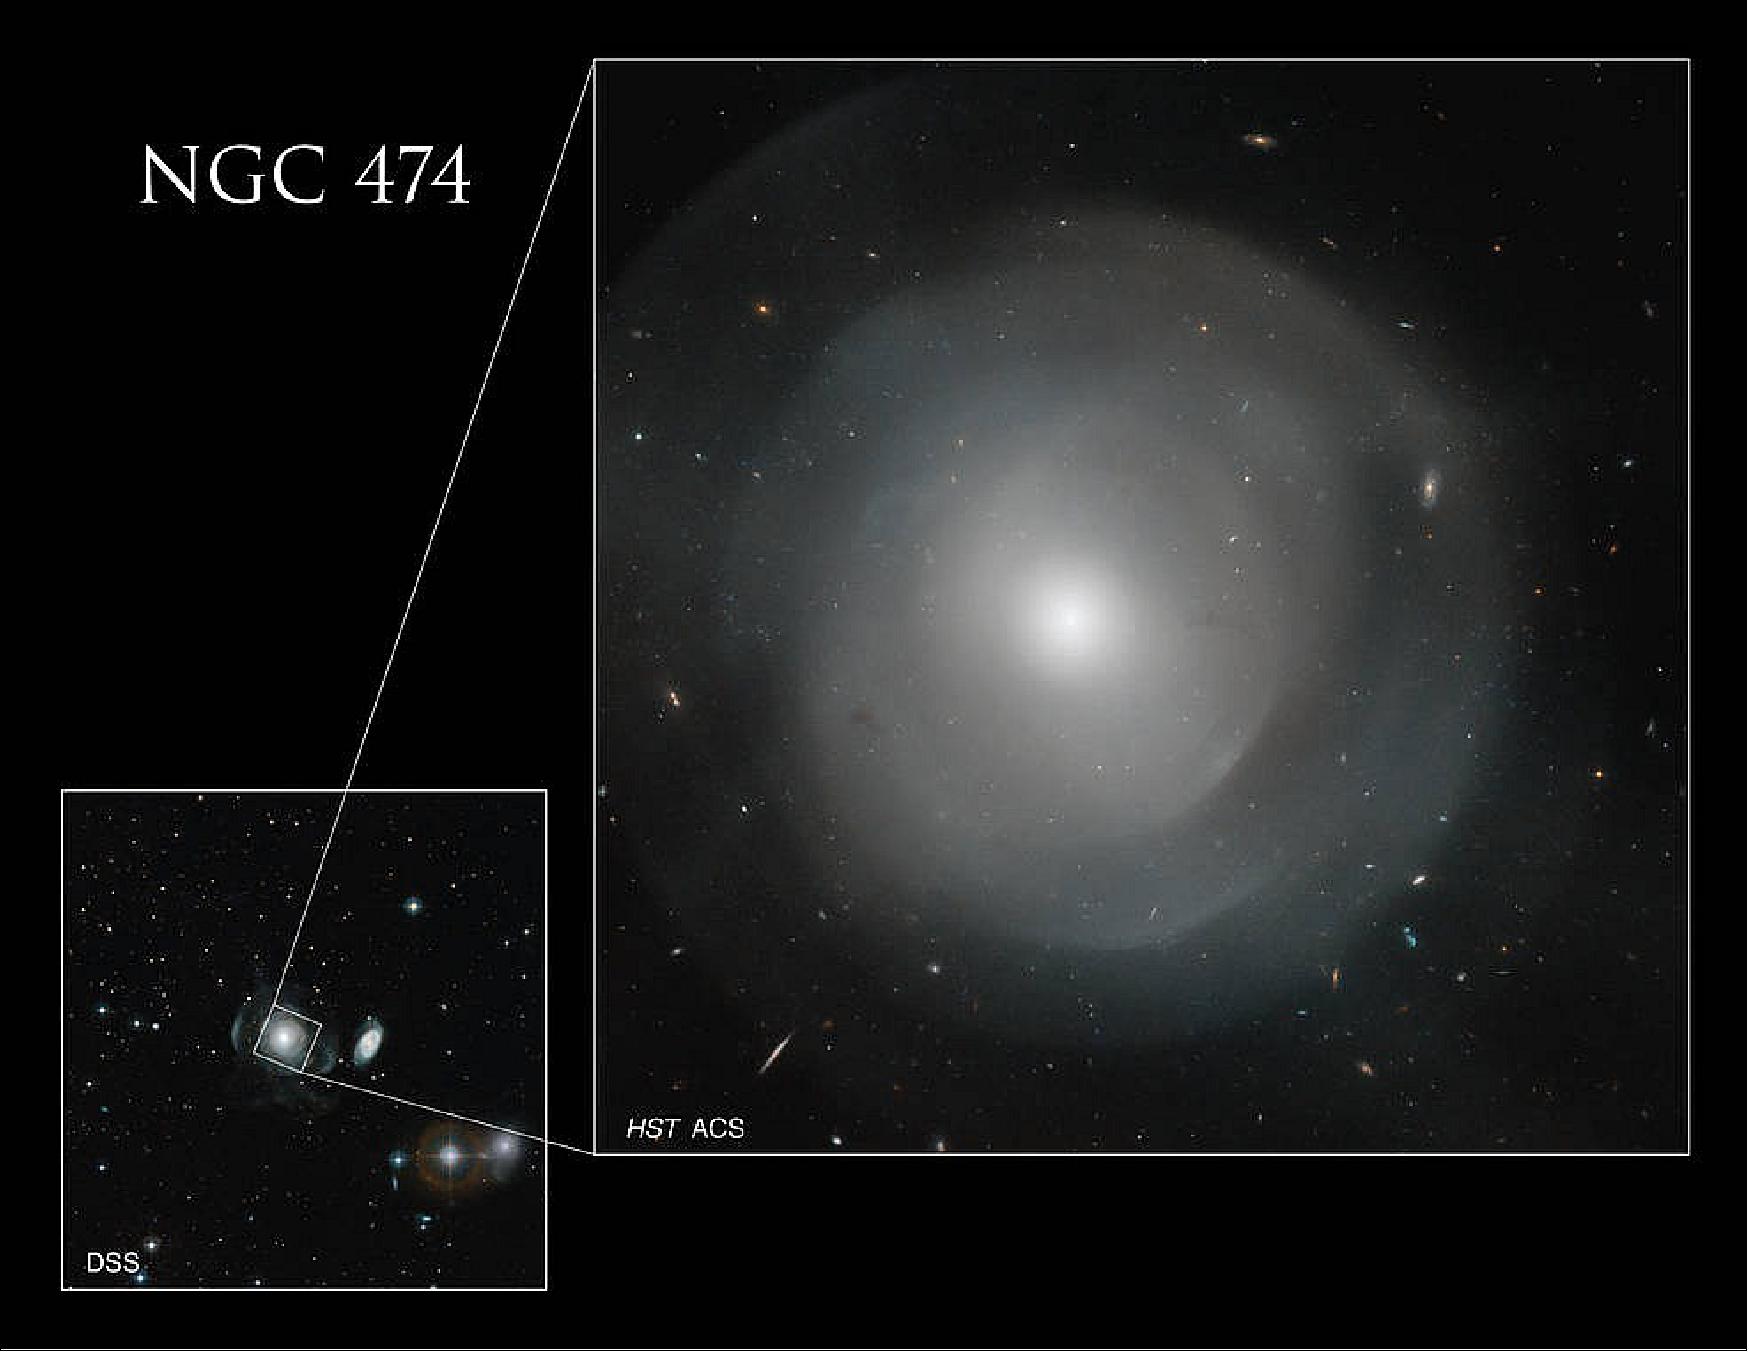 Figure 38: Most elliptical galaxies are associated with galaxy clusters, but NGC 474 is in a relatively empty part of space. Only a much smaller spiral galaxy, NGC 470, is nearby and visible in the Digital Sky Survey image above. This beautiful spiral will likely succumb to NGC 474’s gravitational pull billions of years from now, possibly creating even more complex shells around the giant elliptical [image credits: NASA, ESA, D. Carter (Liverpool John Moores University), DSS; Image processing: G. Kober (NASA Goddard/Catholic University of America)]